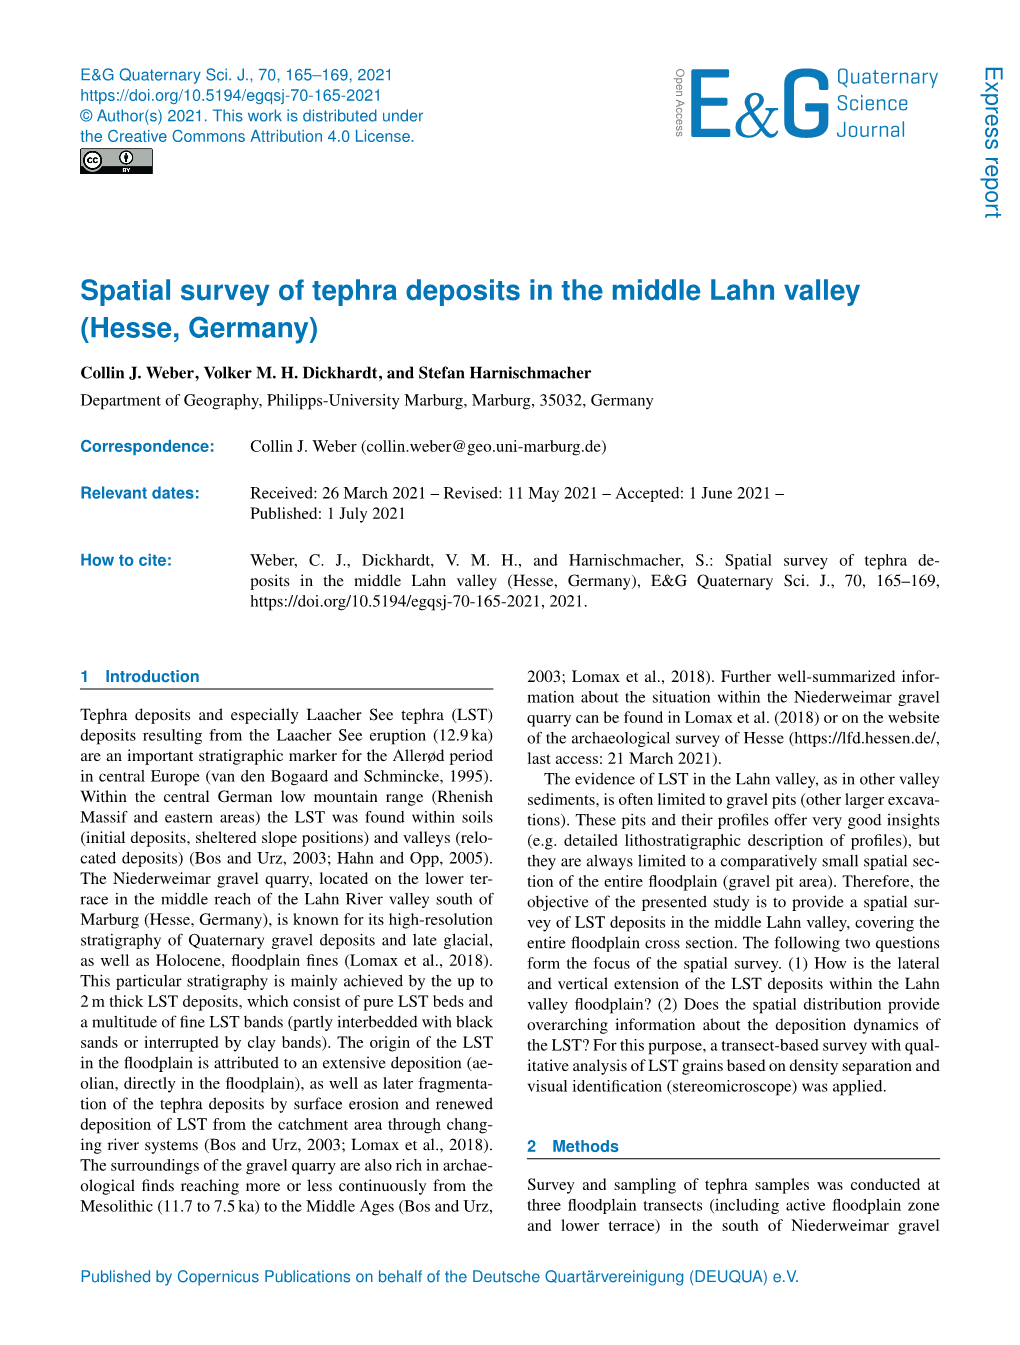 Spatial Survey of Tephra Deposits in the Middle Lahn Valley (Hesse, Germany)